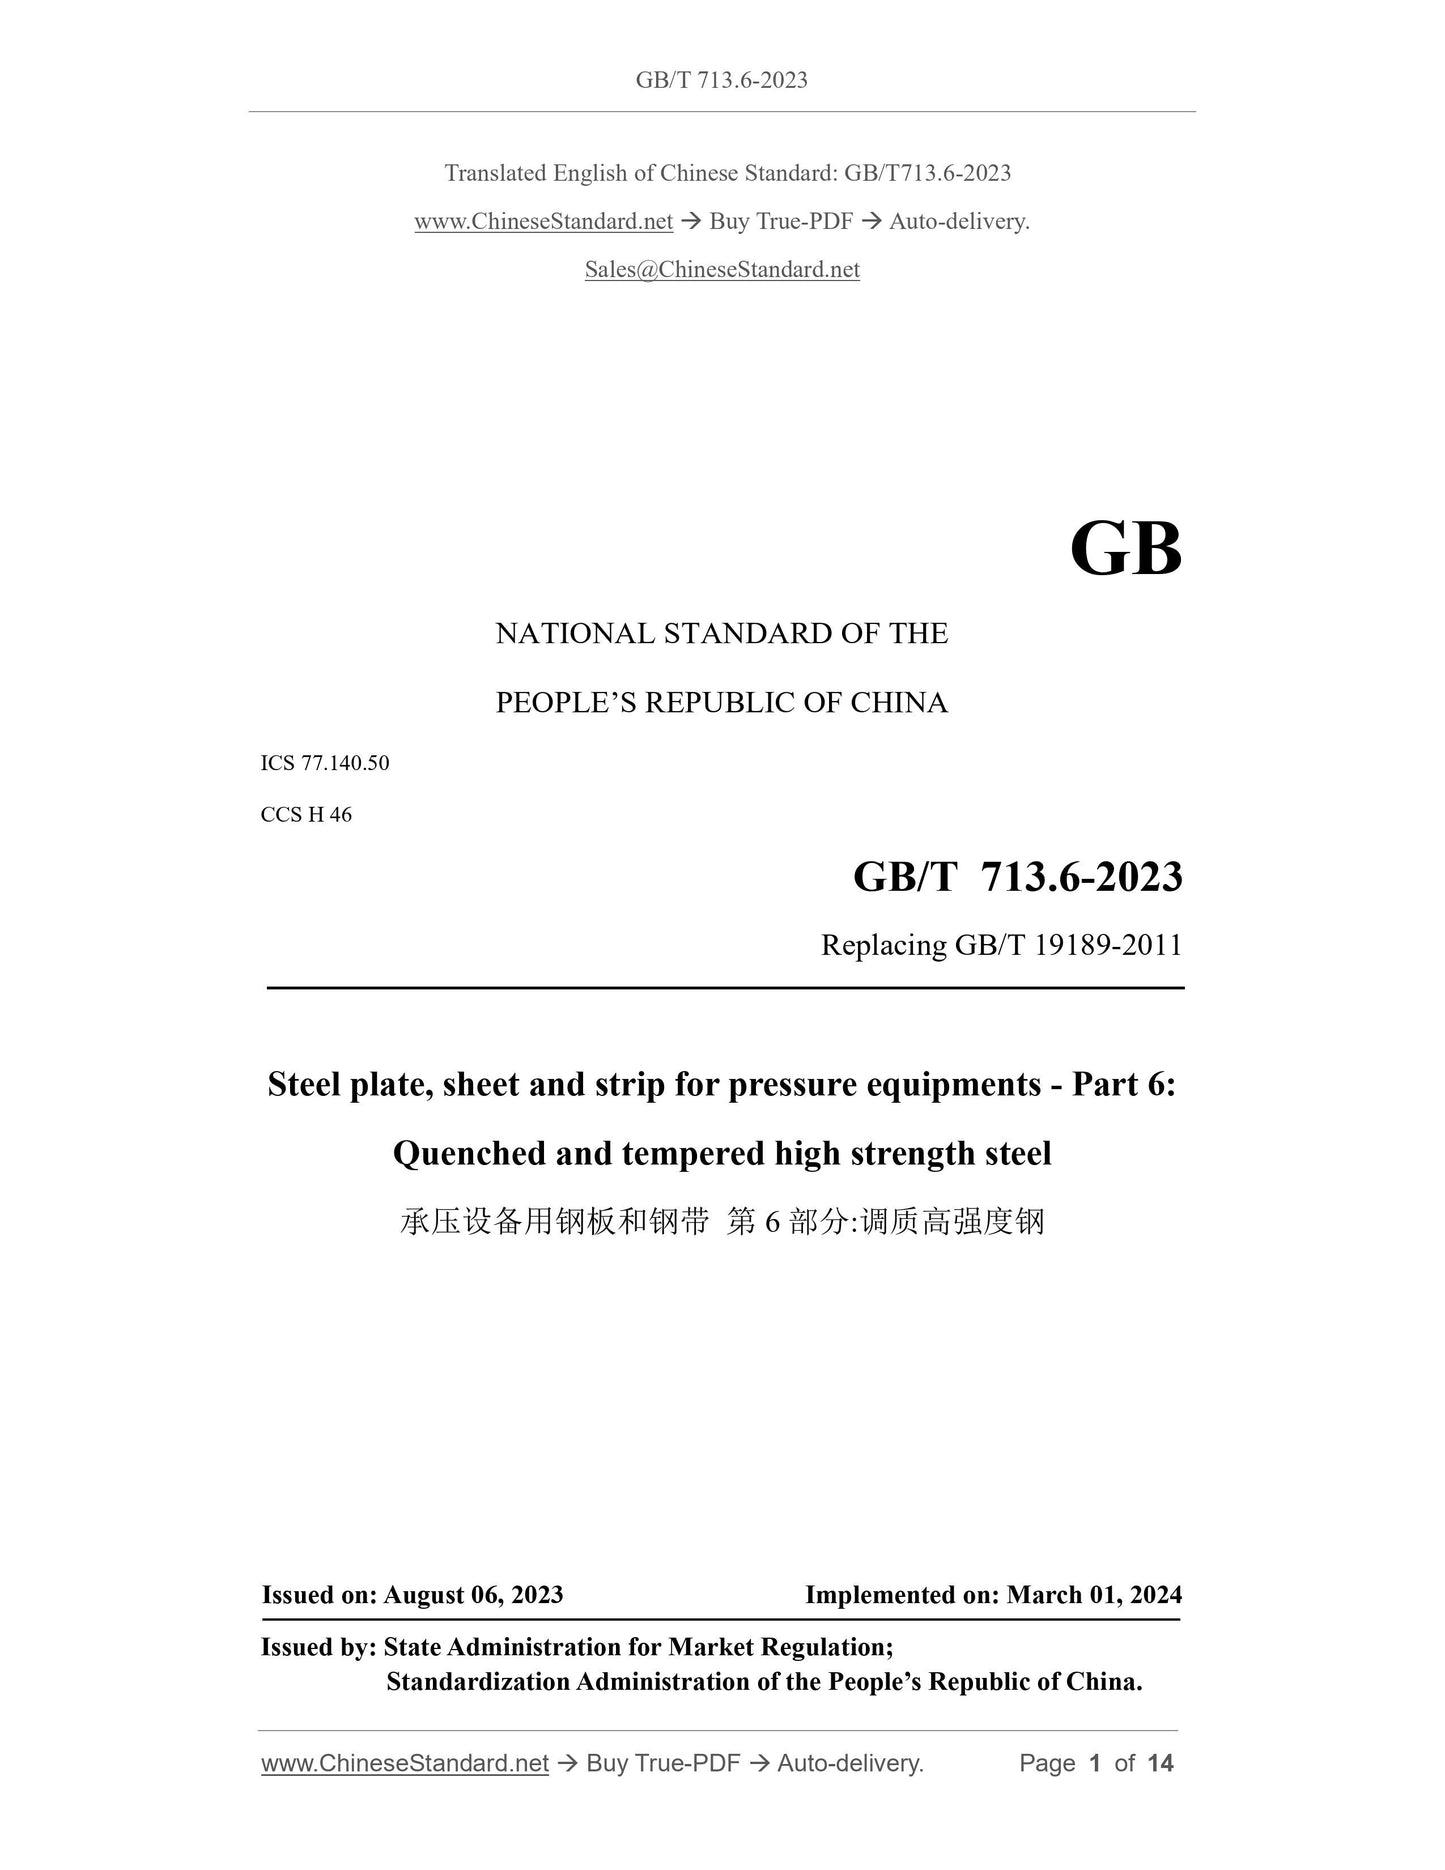 GB/T 713.6-2023 Page 1